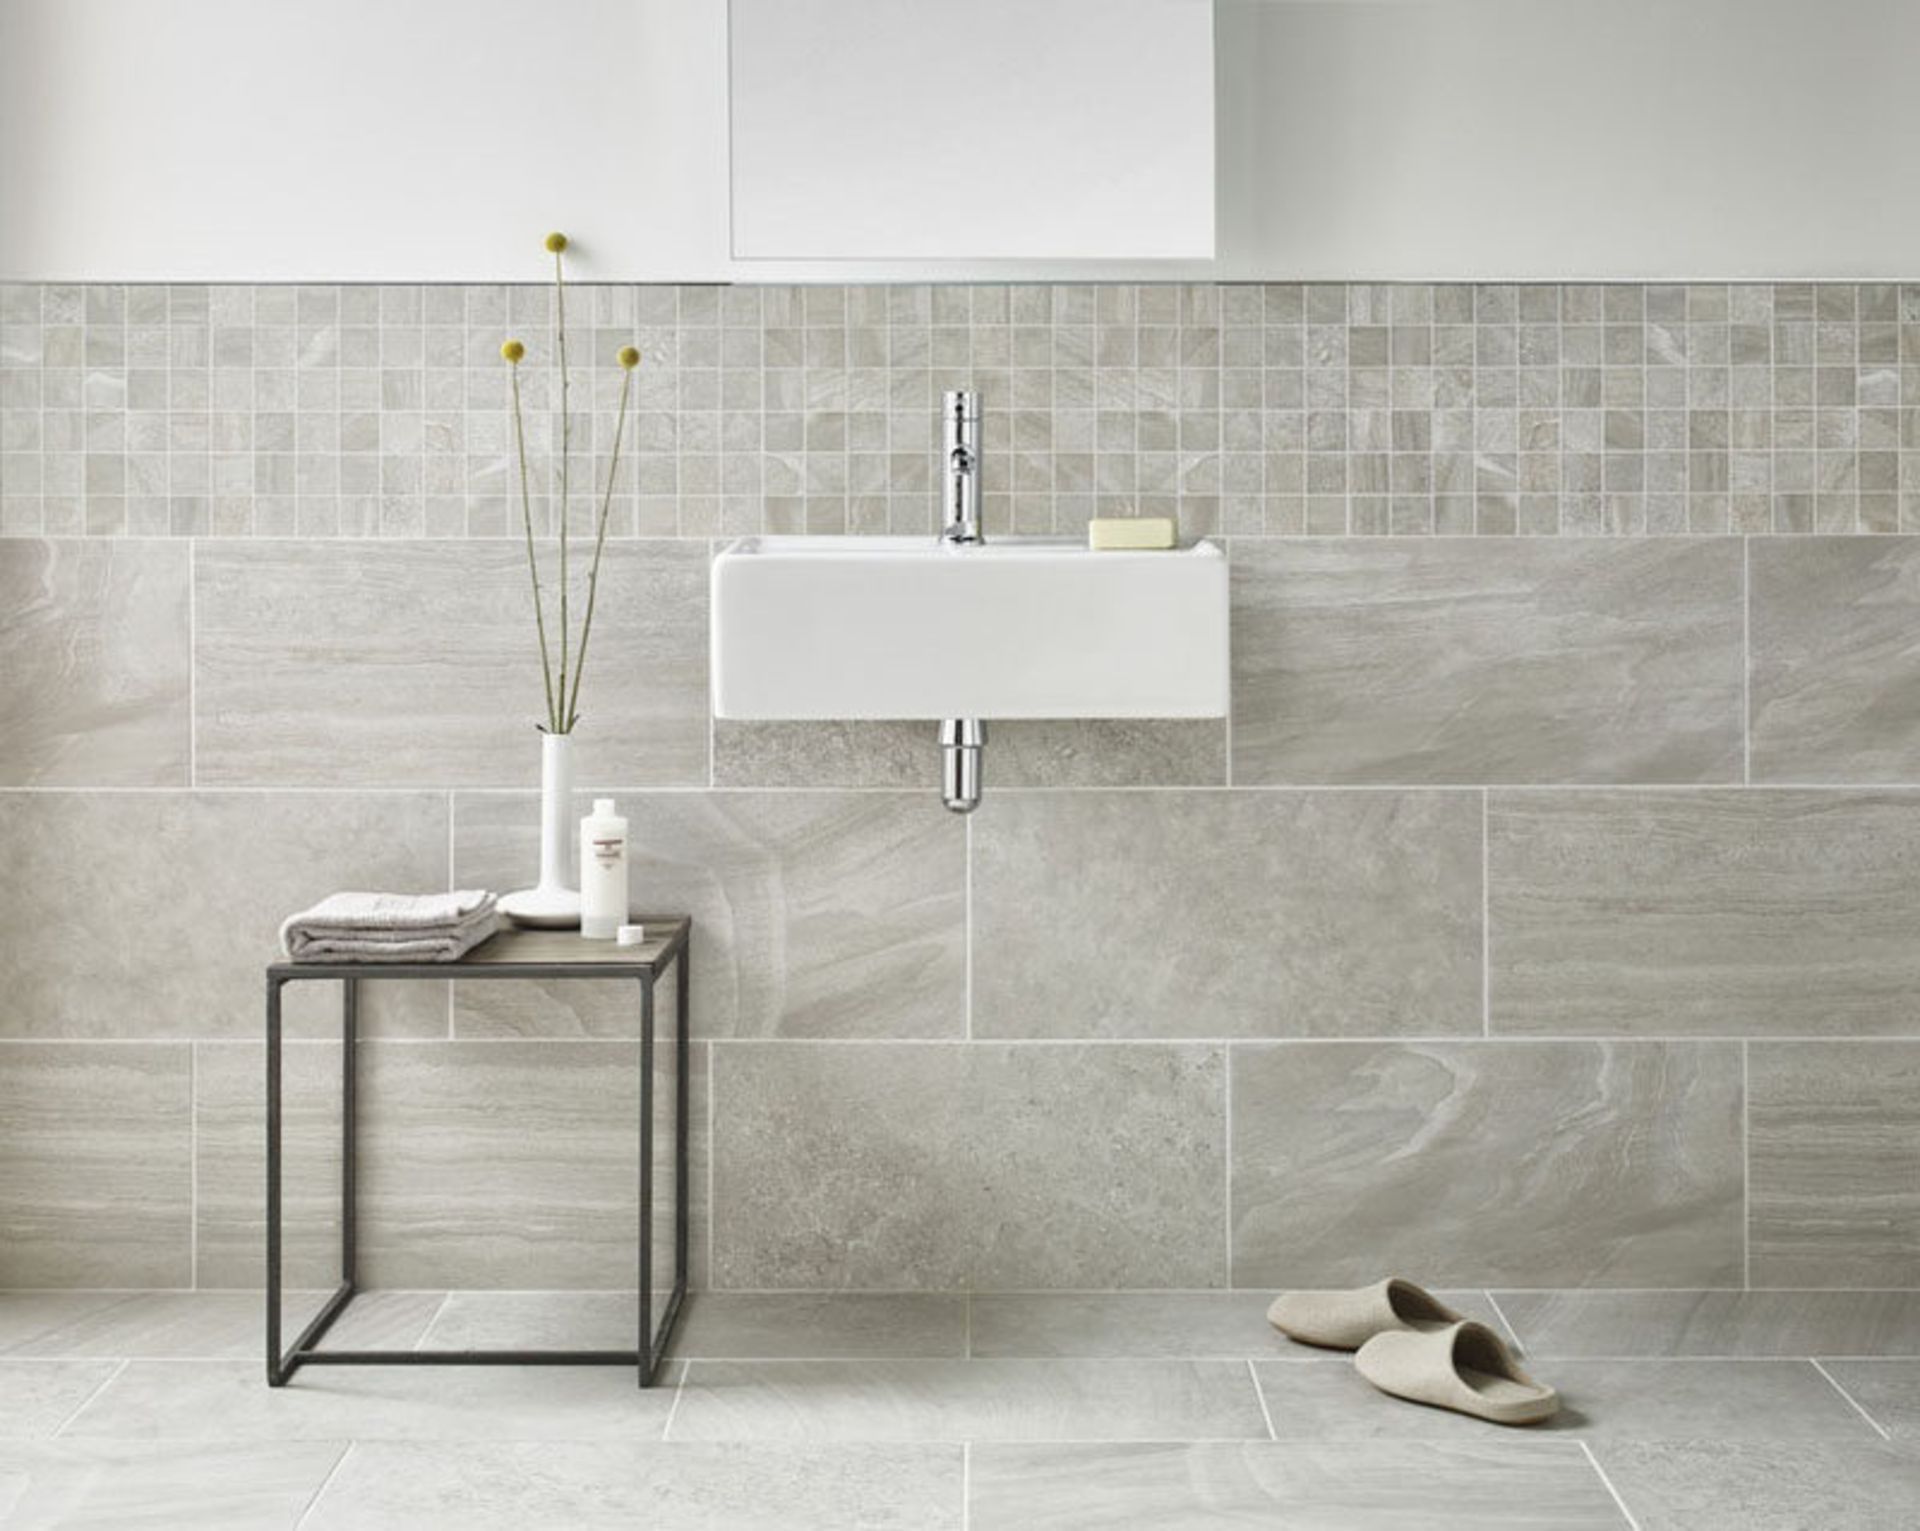 NEW 8.64m2 Bloomsbury Brook Edge Lapatto Beige Wall and Floor Tiles. 300x600mm per tile, 8.3mm... - Bild 3 aus 3